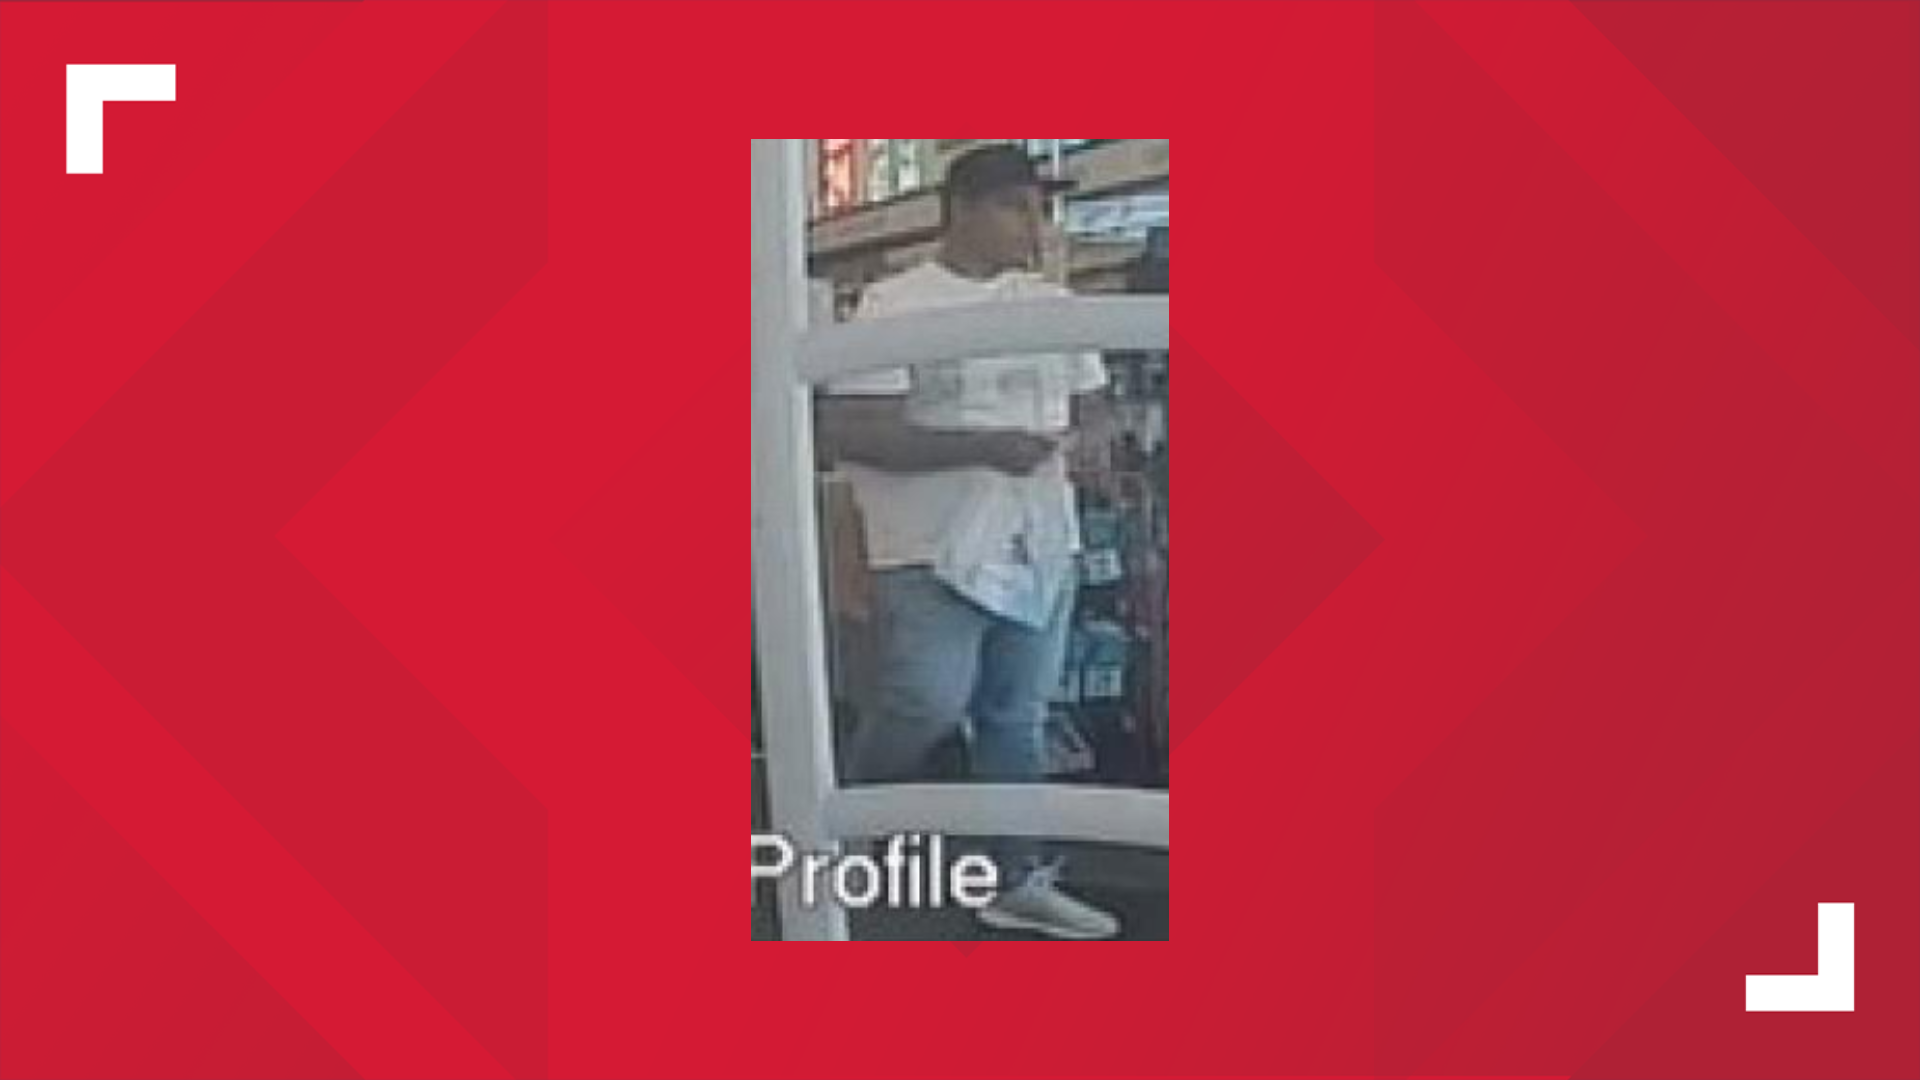 Greensboro/Guilford County Crime Stoppers says someone made purchases with fake money at 3 different Walgreens on June 11.